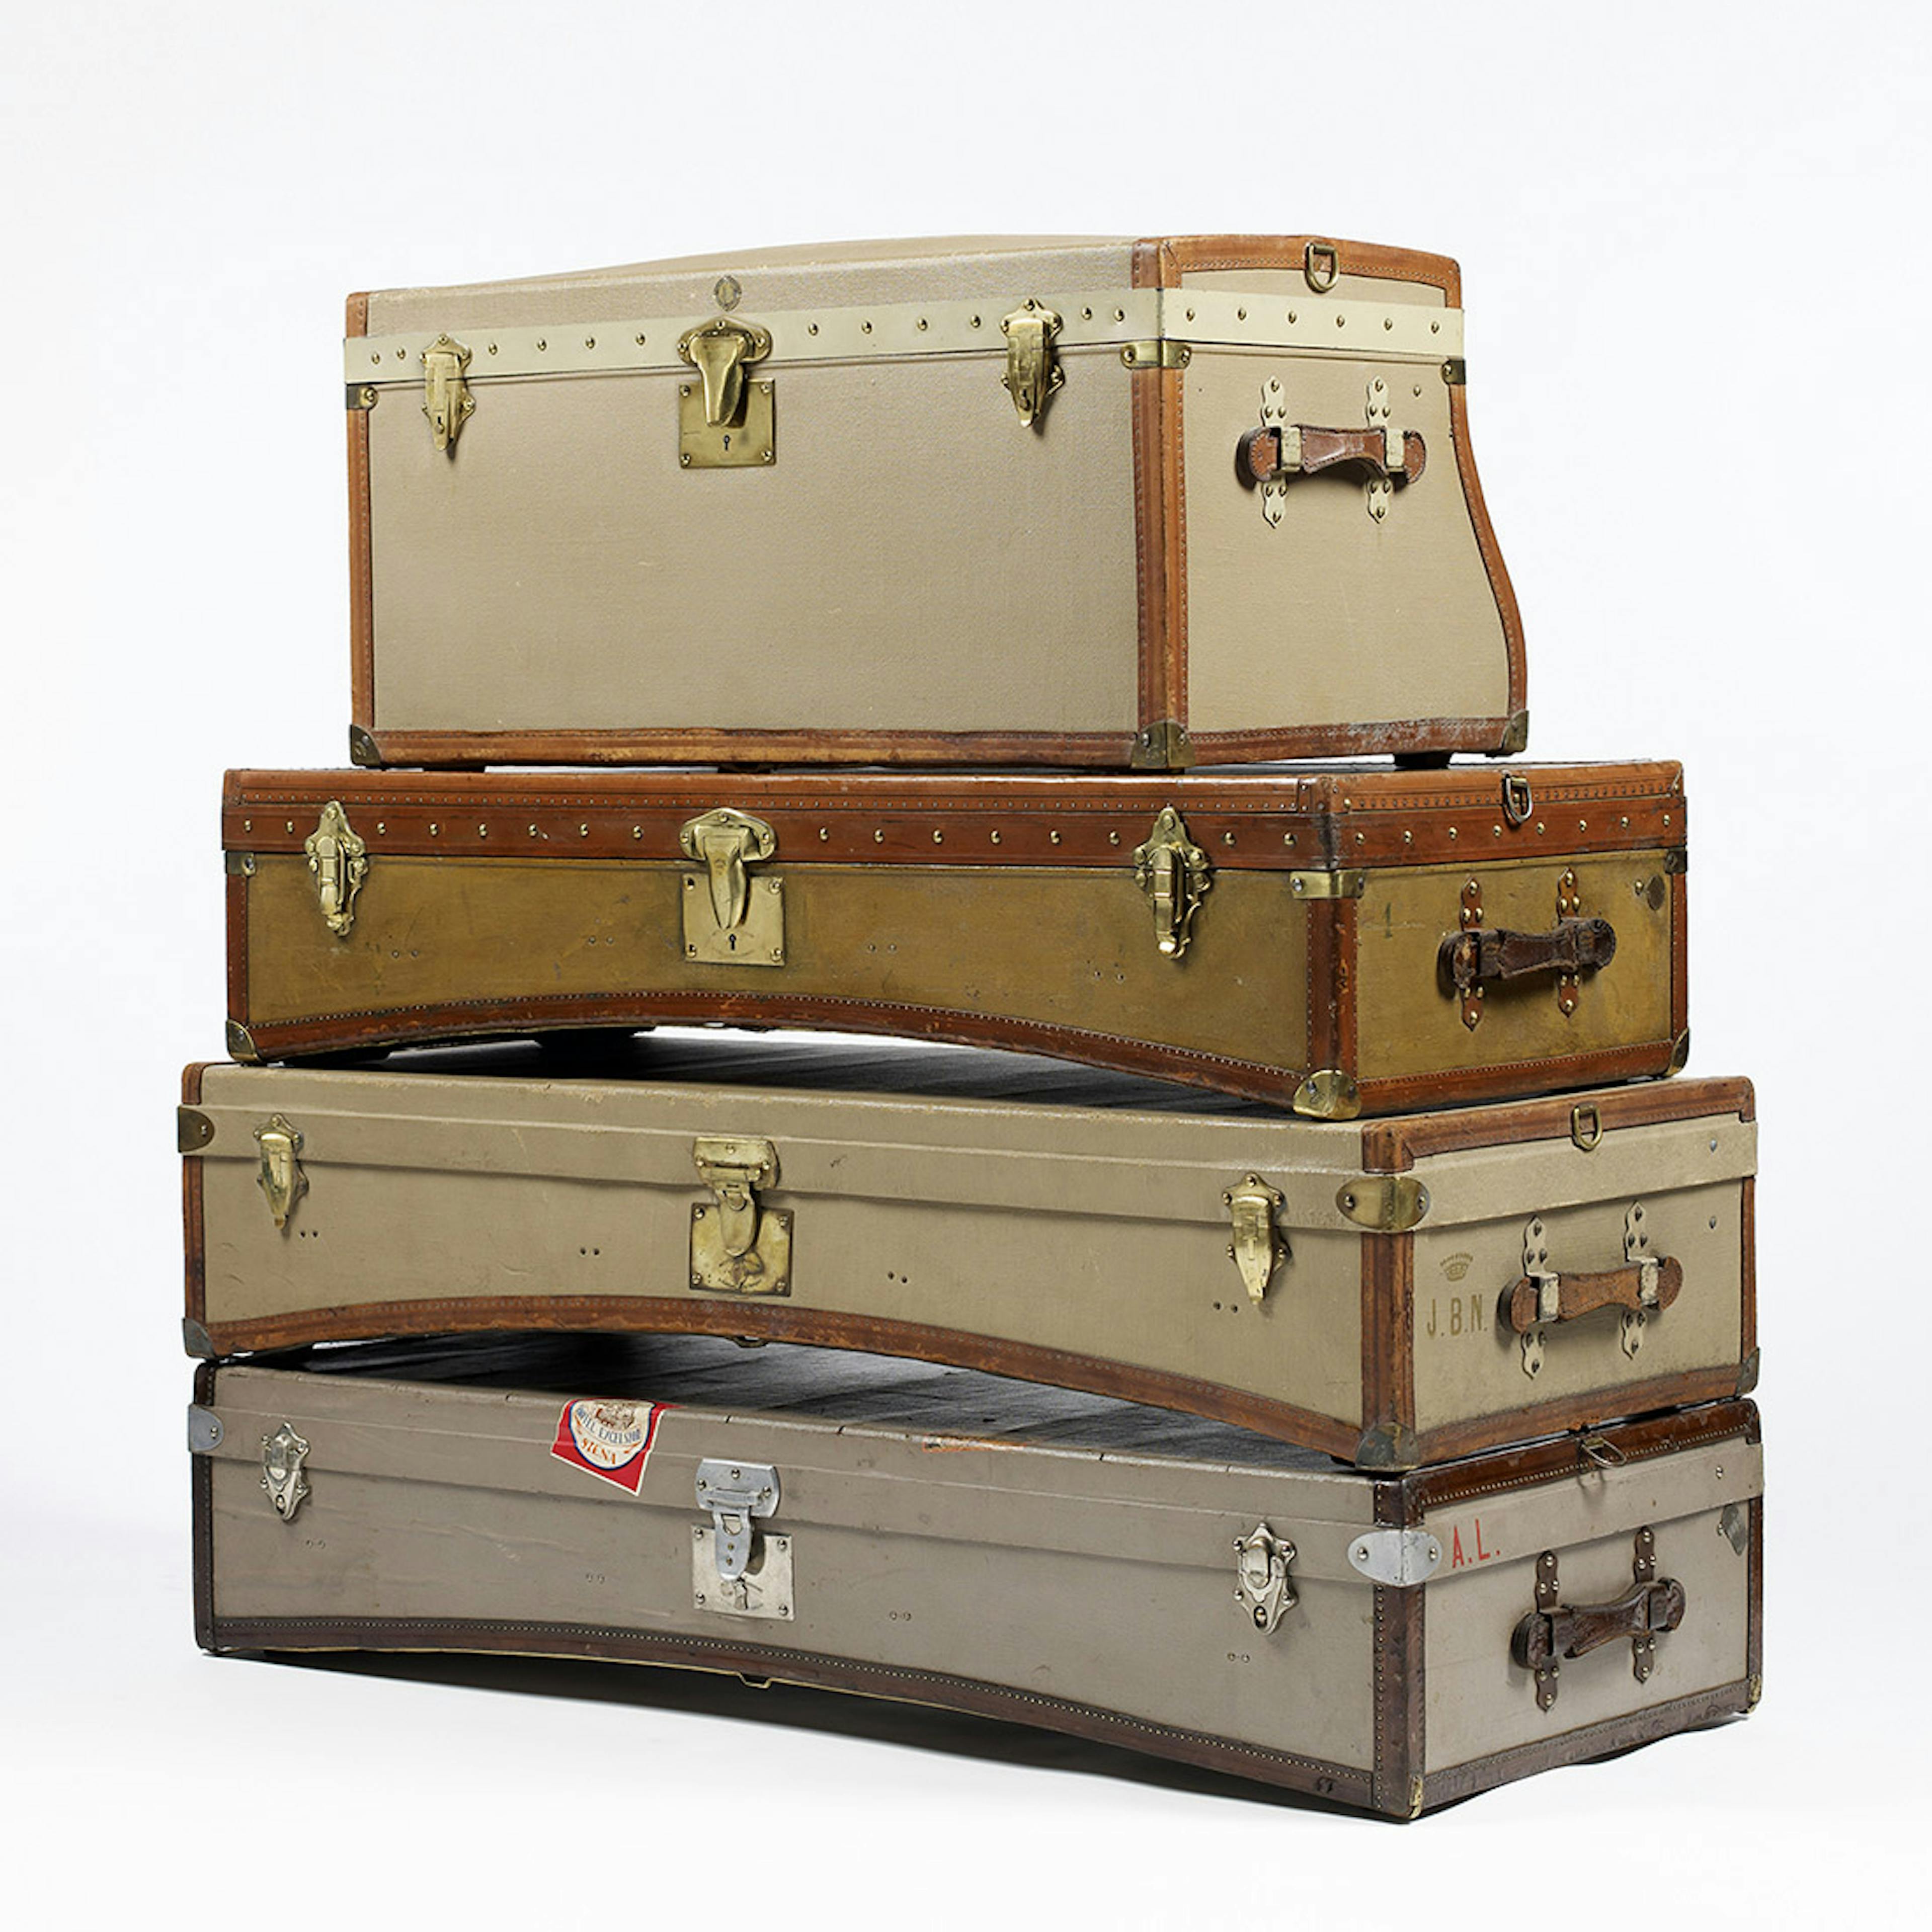 Vintage Limousine Trunks – Patented by MOYNAT in 1902 © Moynat archives